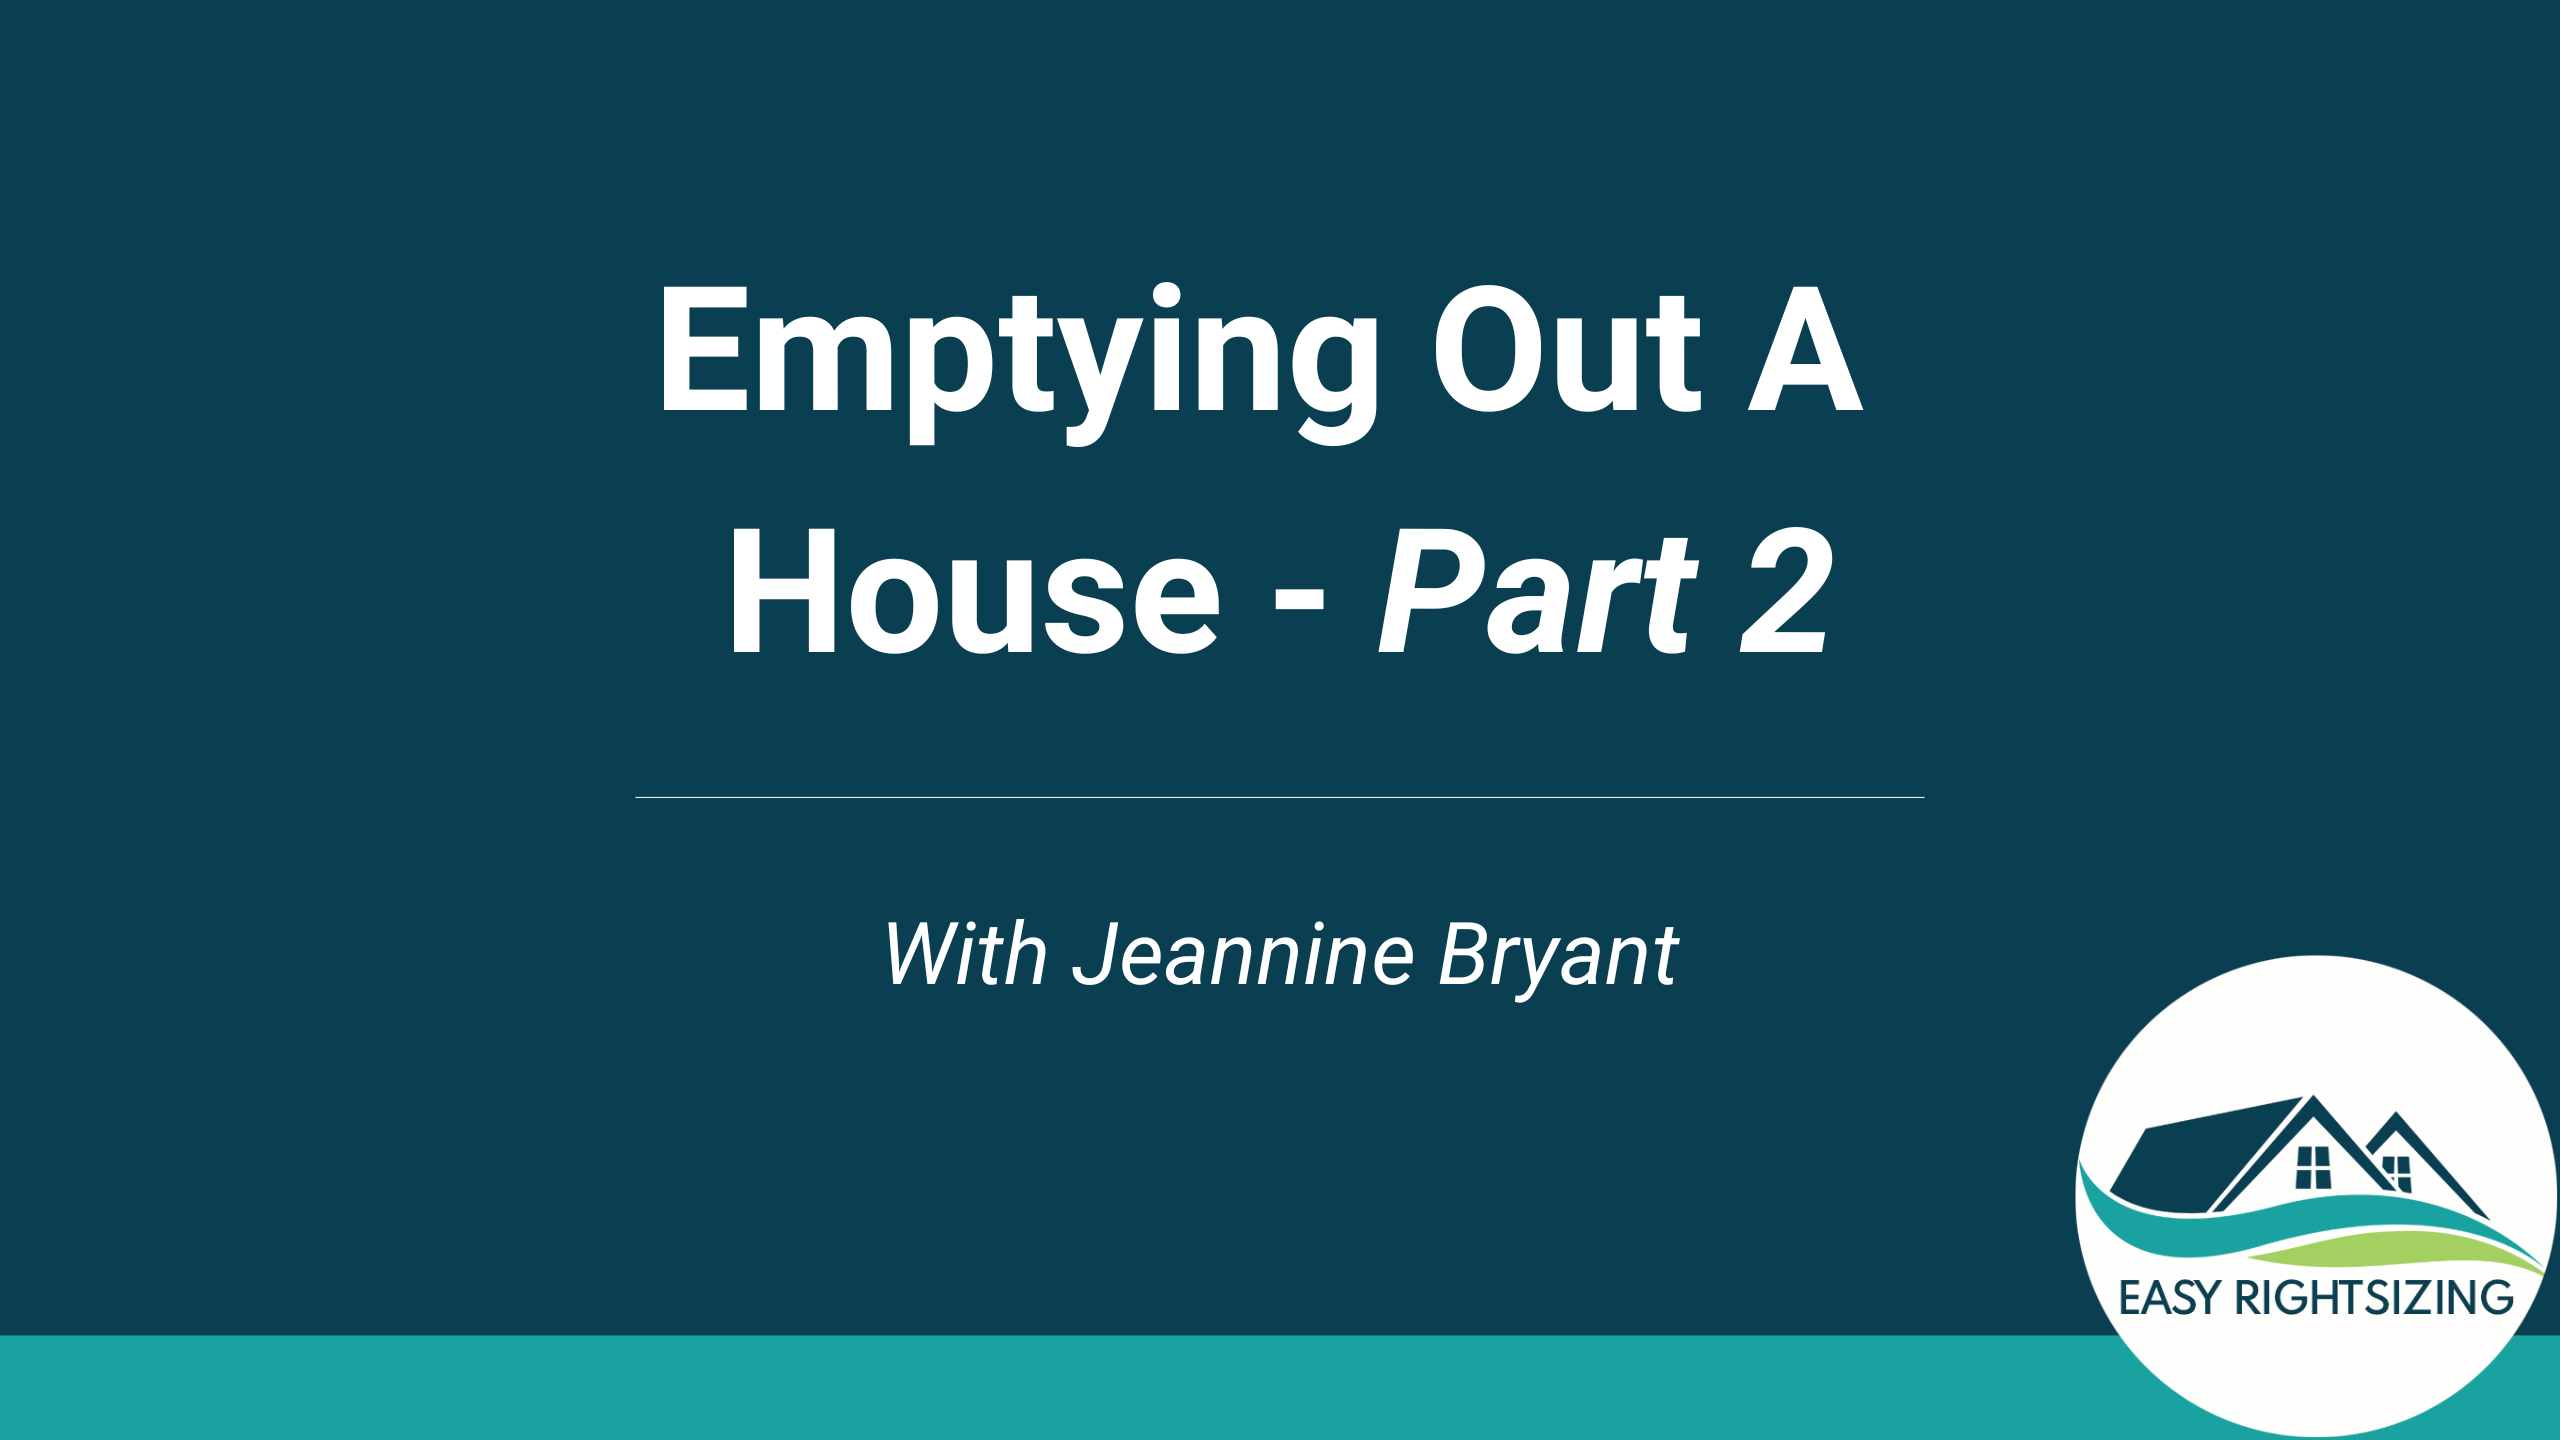 Emptying Out A House - Part 2